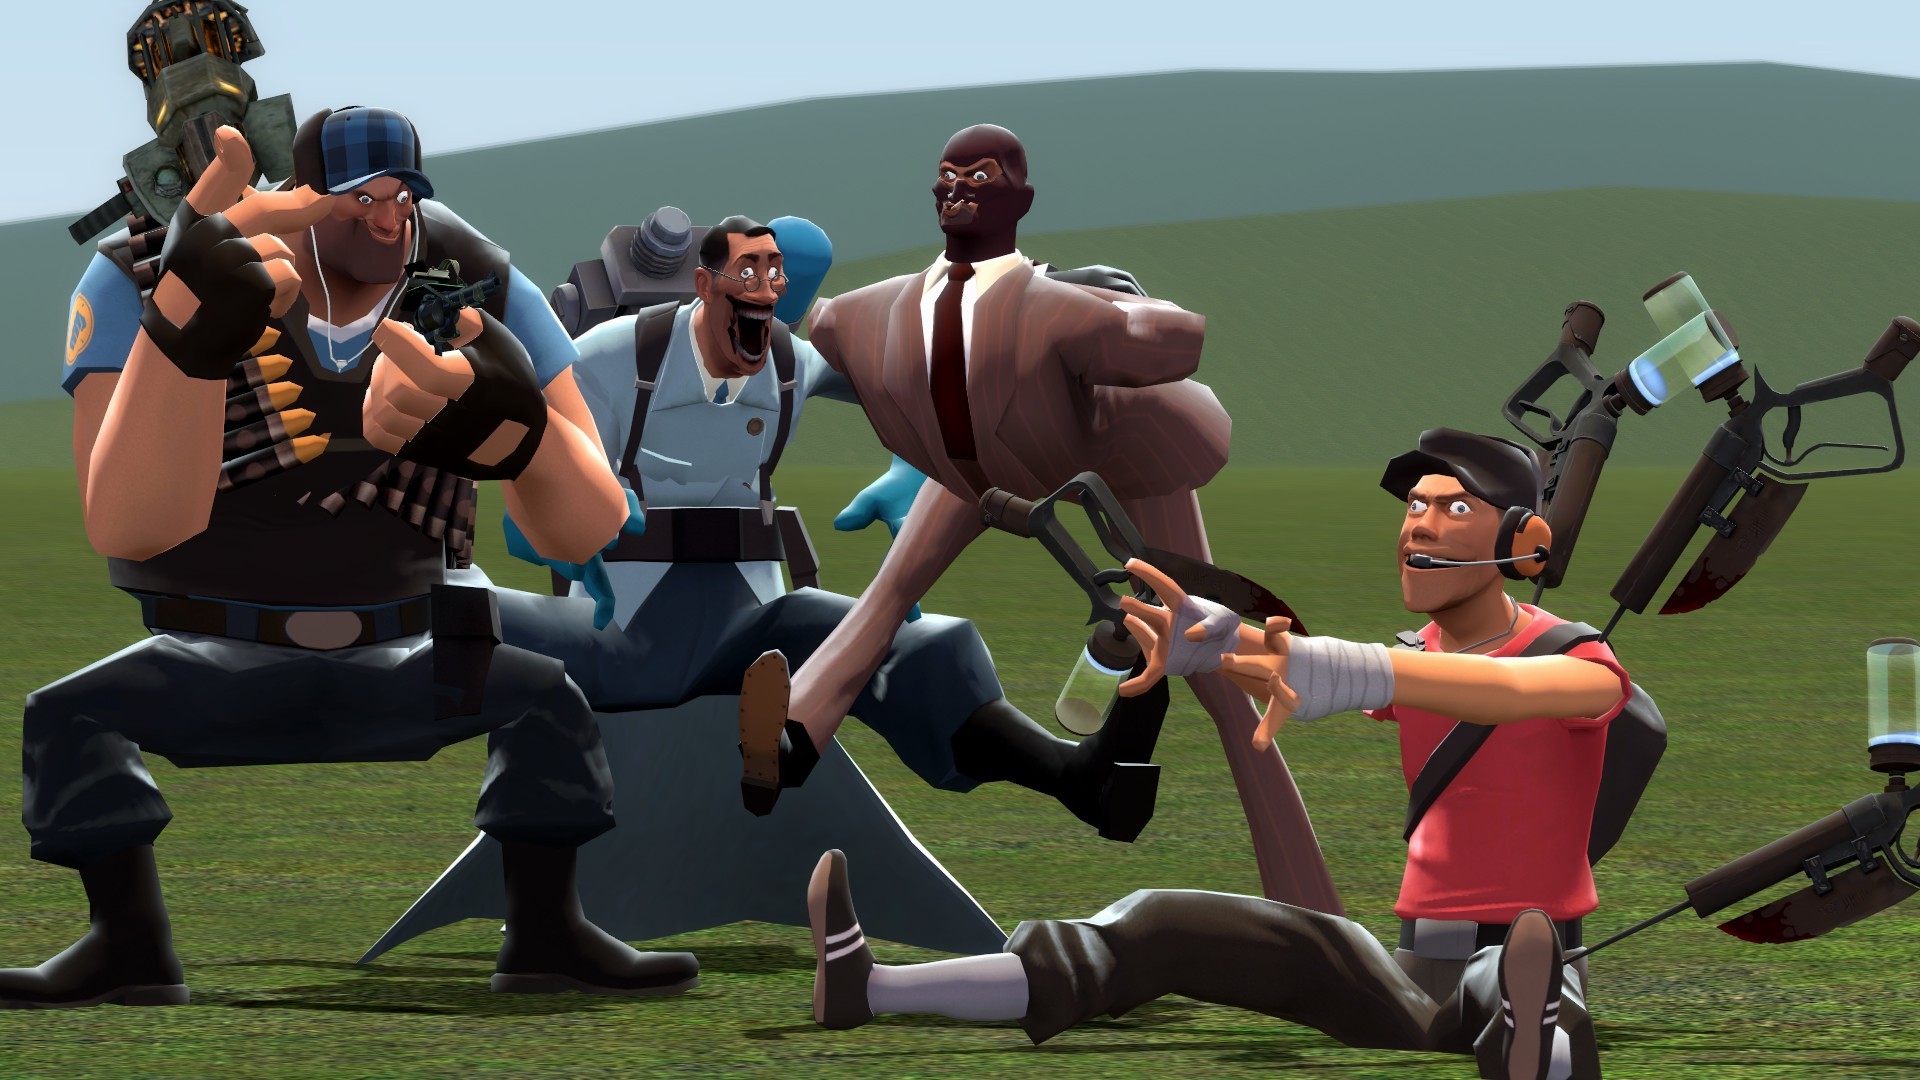 First Ever TF2 Wallpaper Ive made using Garrys Mod Opinions  rtf2